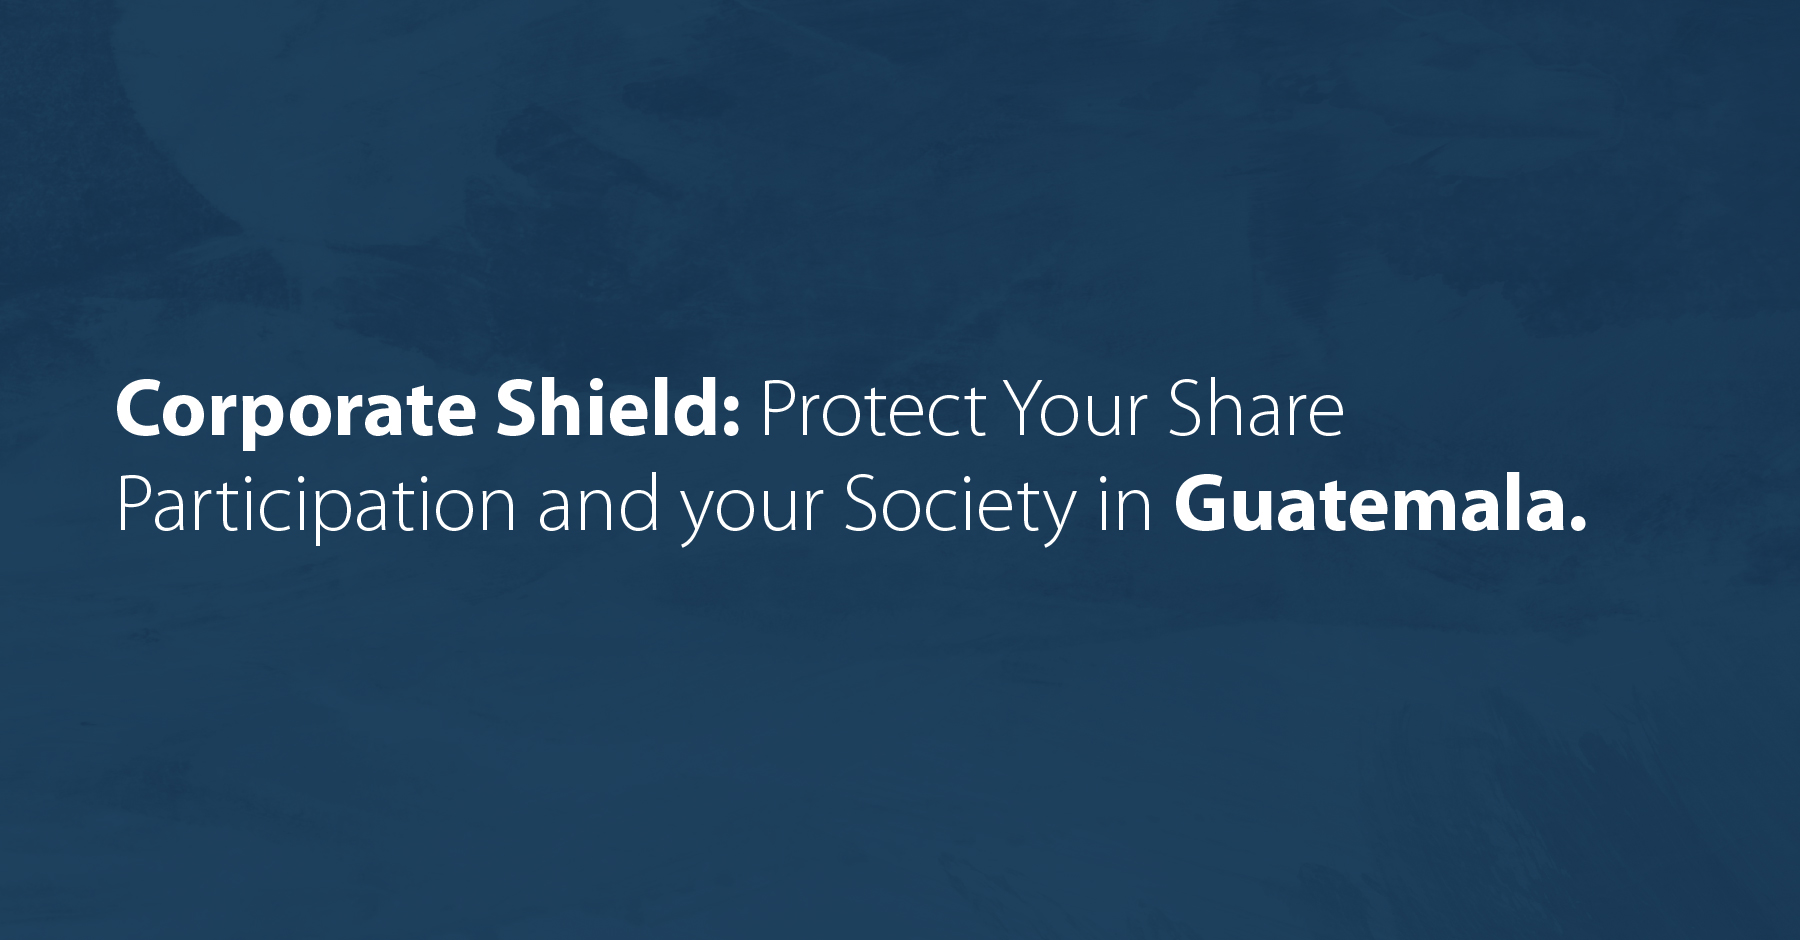 Corporate Shield: Protect Your Share Participation and your Society in Guatemala.